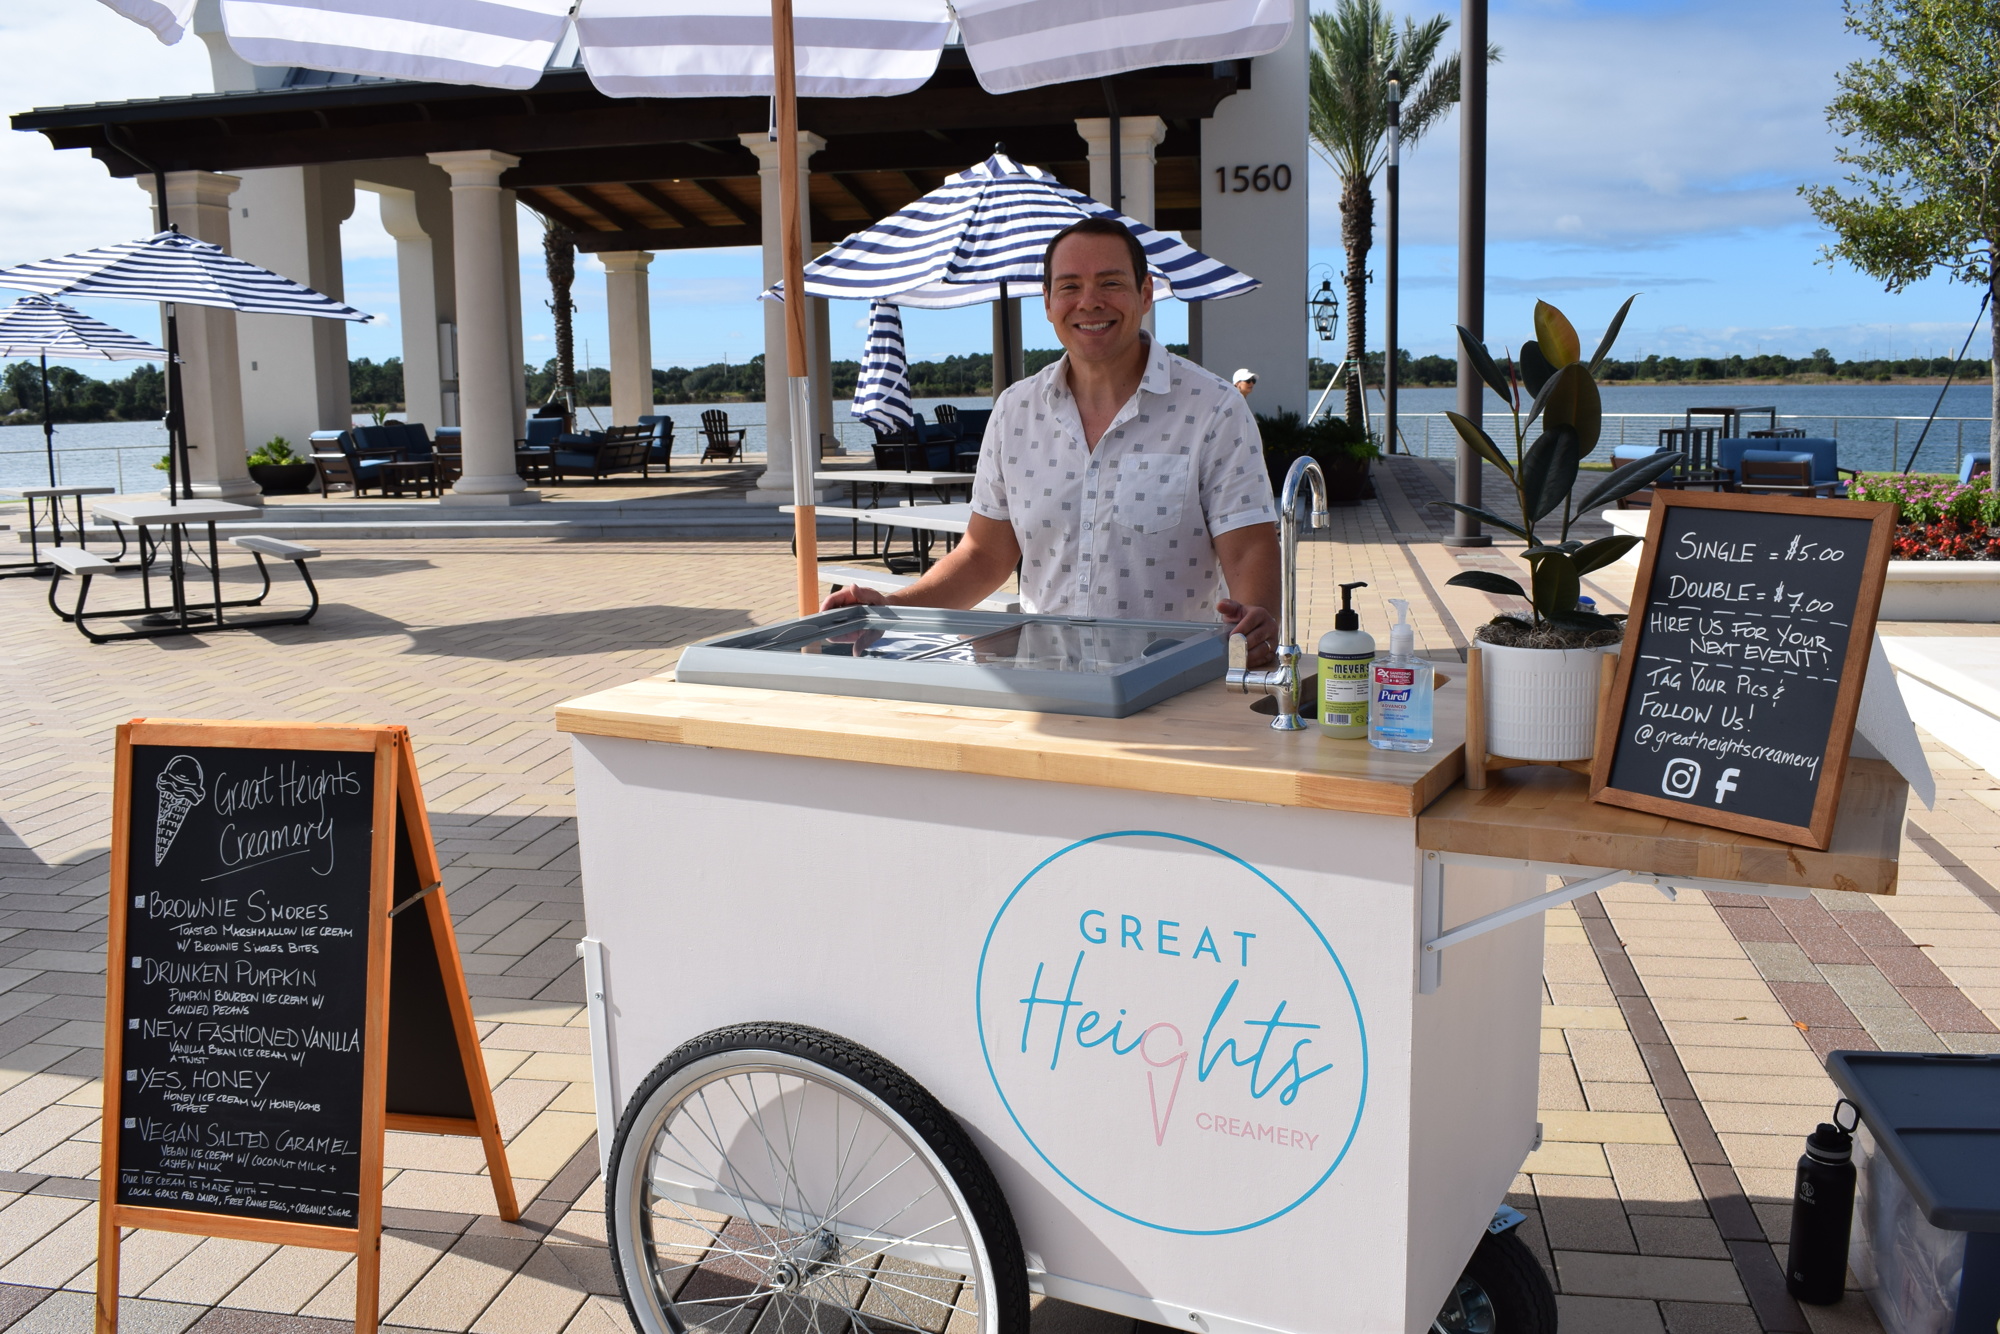 Ryan Edwards of Great Heights Creamery of Sarasota says he has the perfect spot, right at the midpoint of Lakefront Drive at the Farmers Market at Lakewood Ranch.